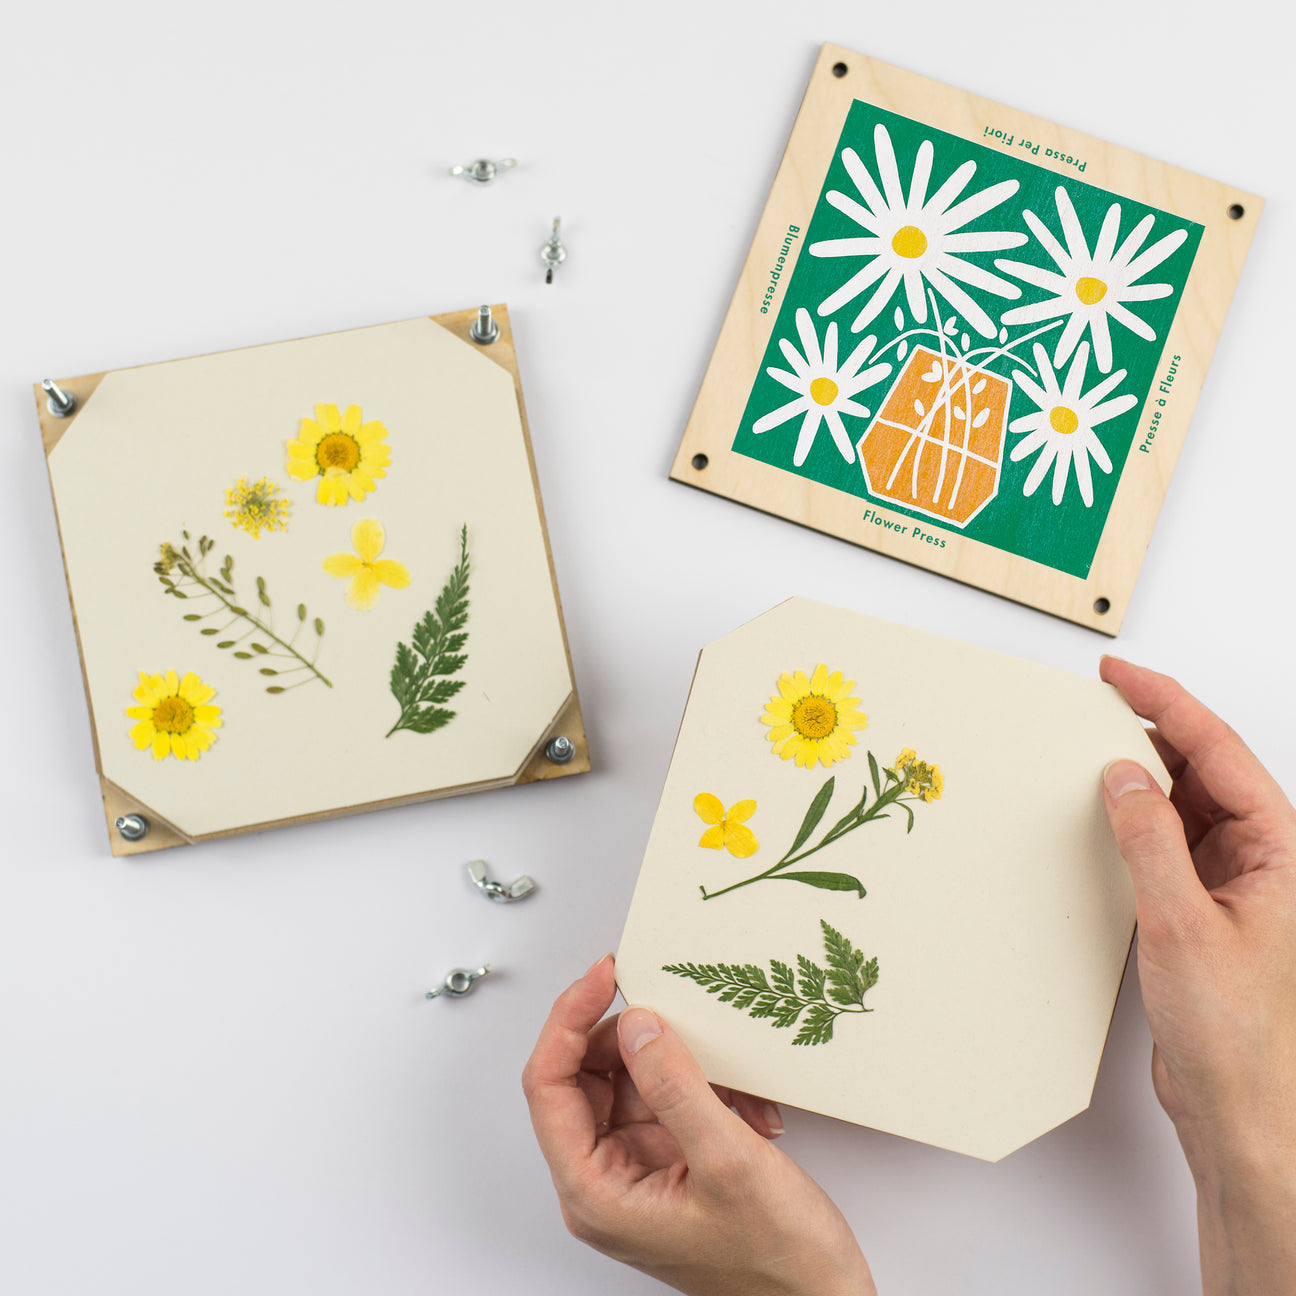 Flower Press - Daisy - The Bristol Artisan Handmade Sustainable Gifts and Homewares.